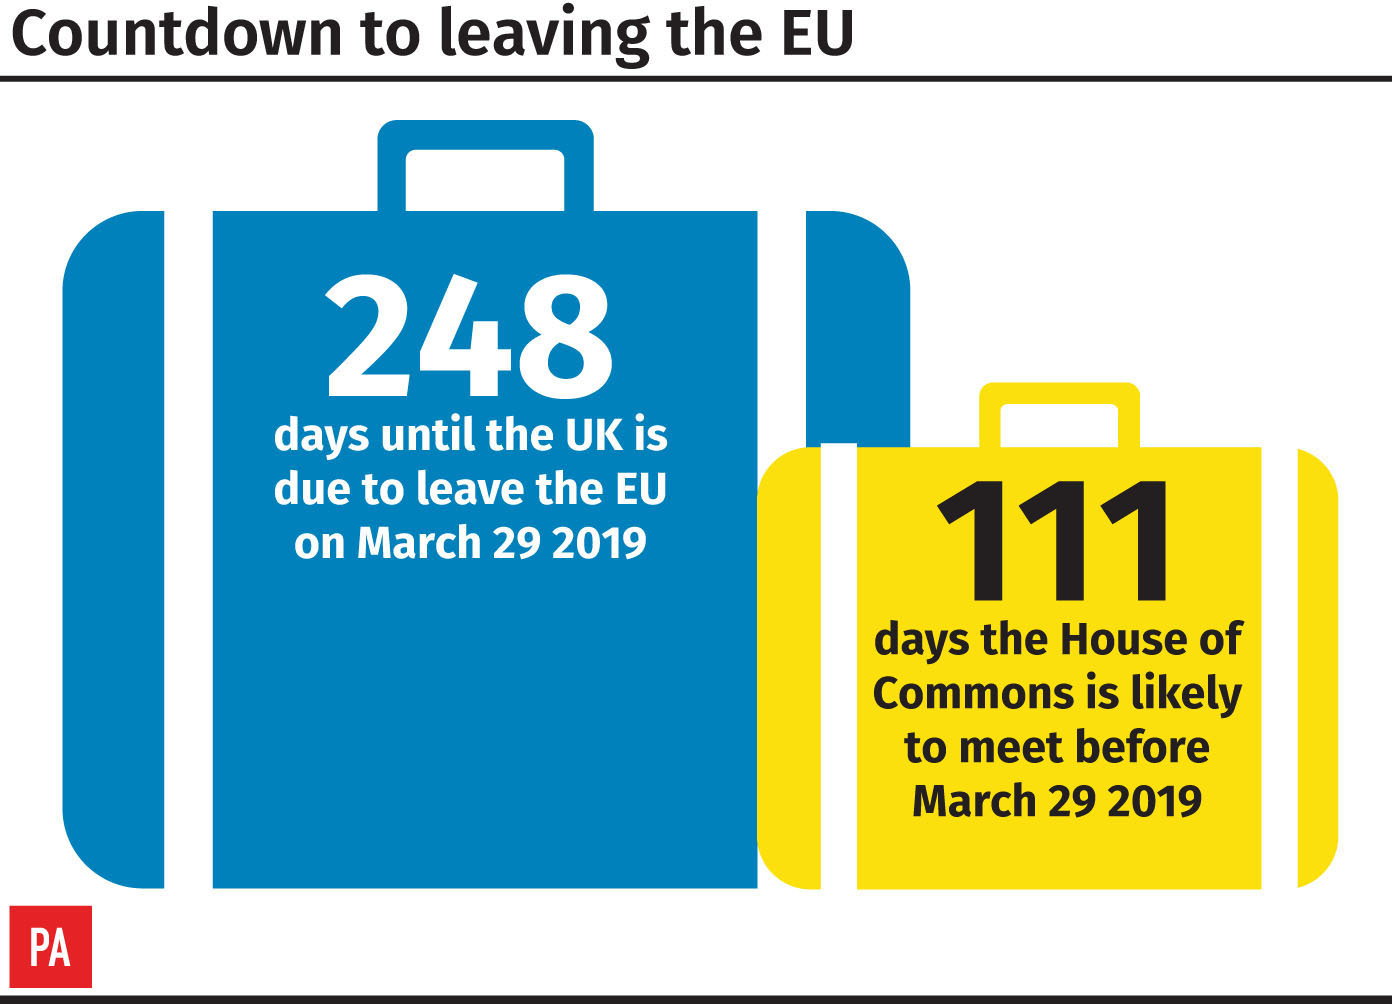 Countdown to leaving the EU graphic